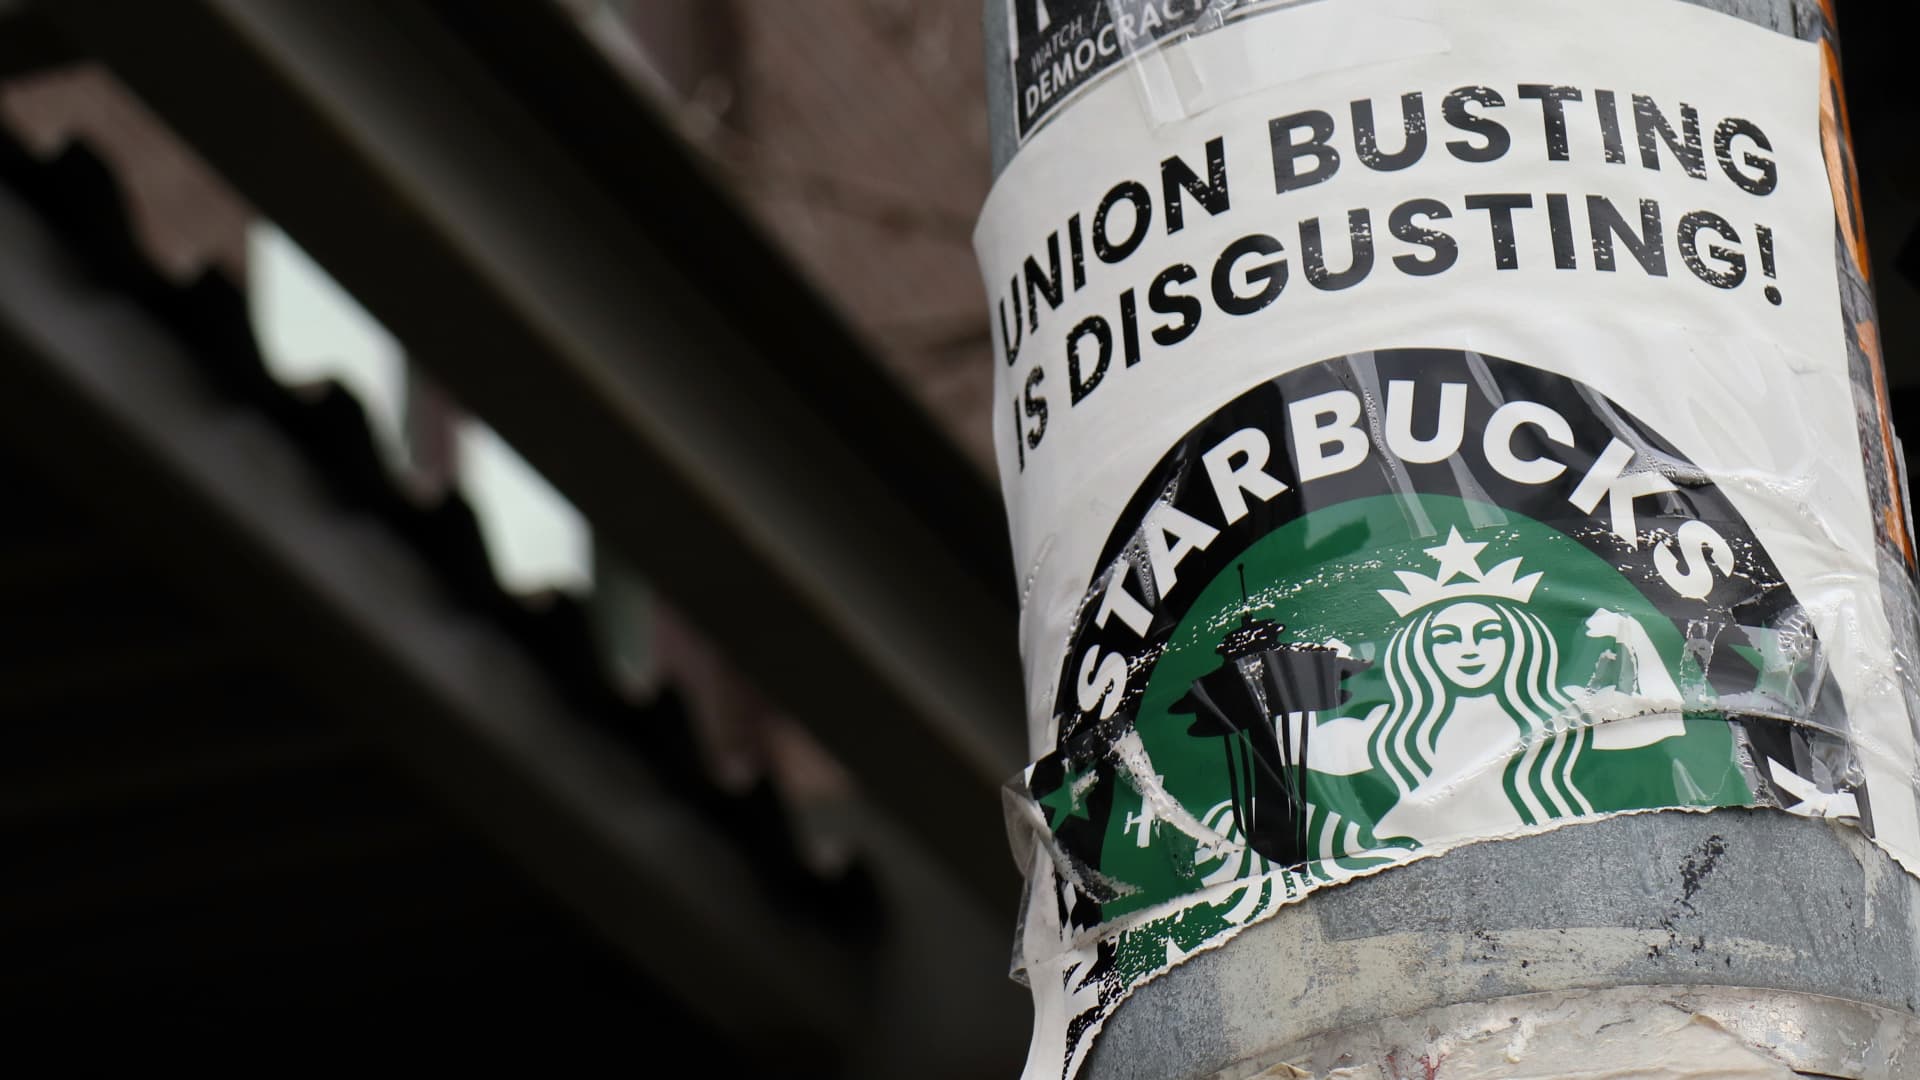 Union reportedly claims Starbucks illegally chose to close cafe to retaliate